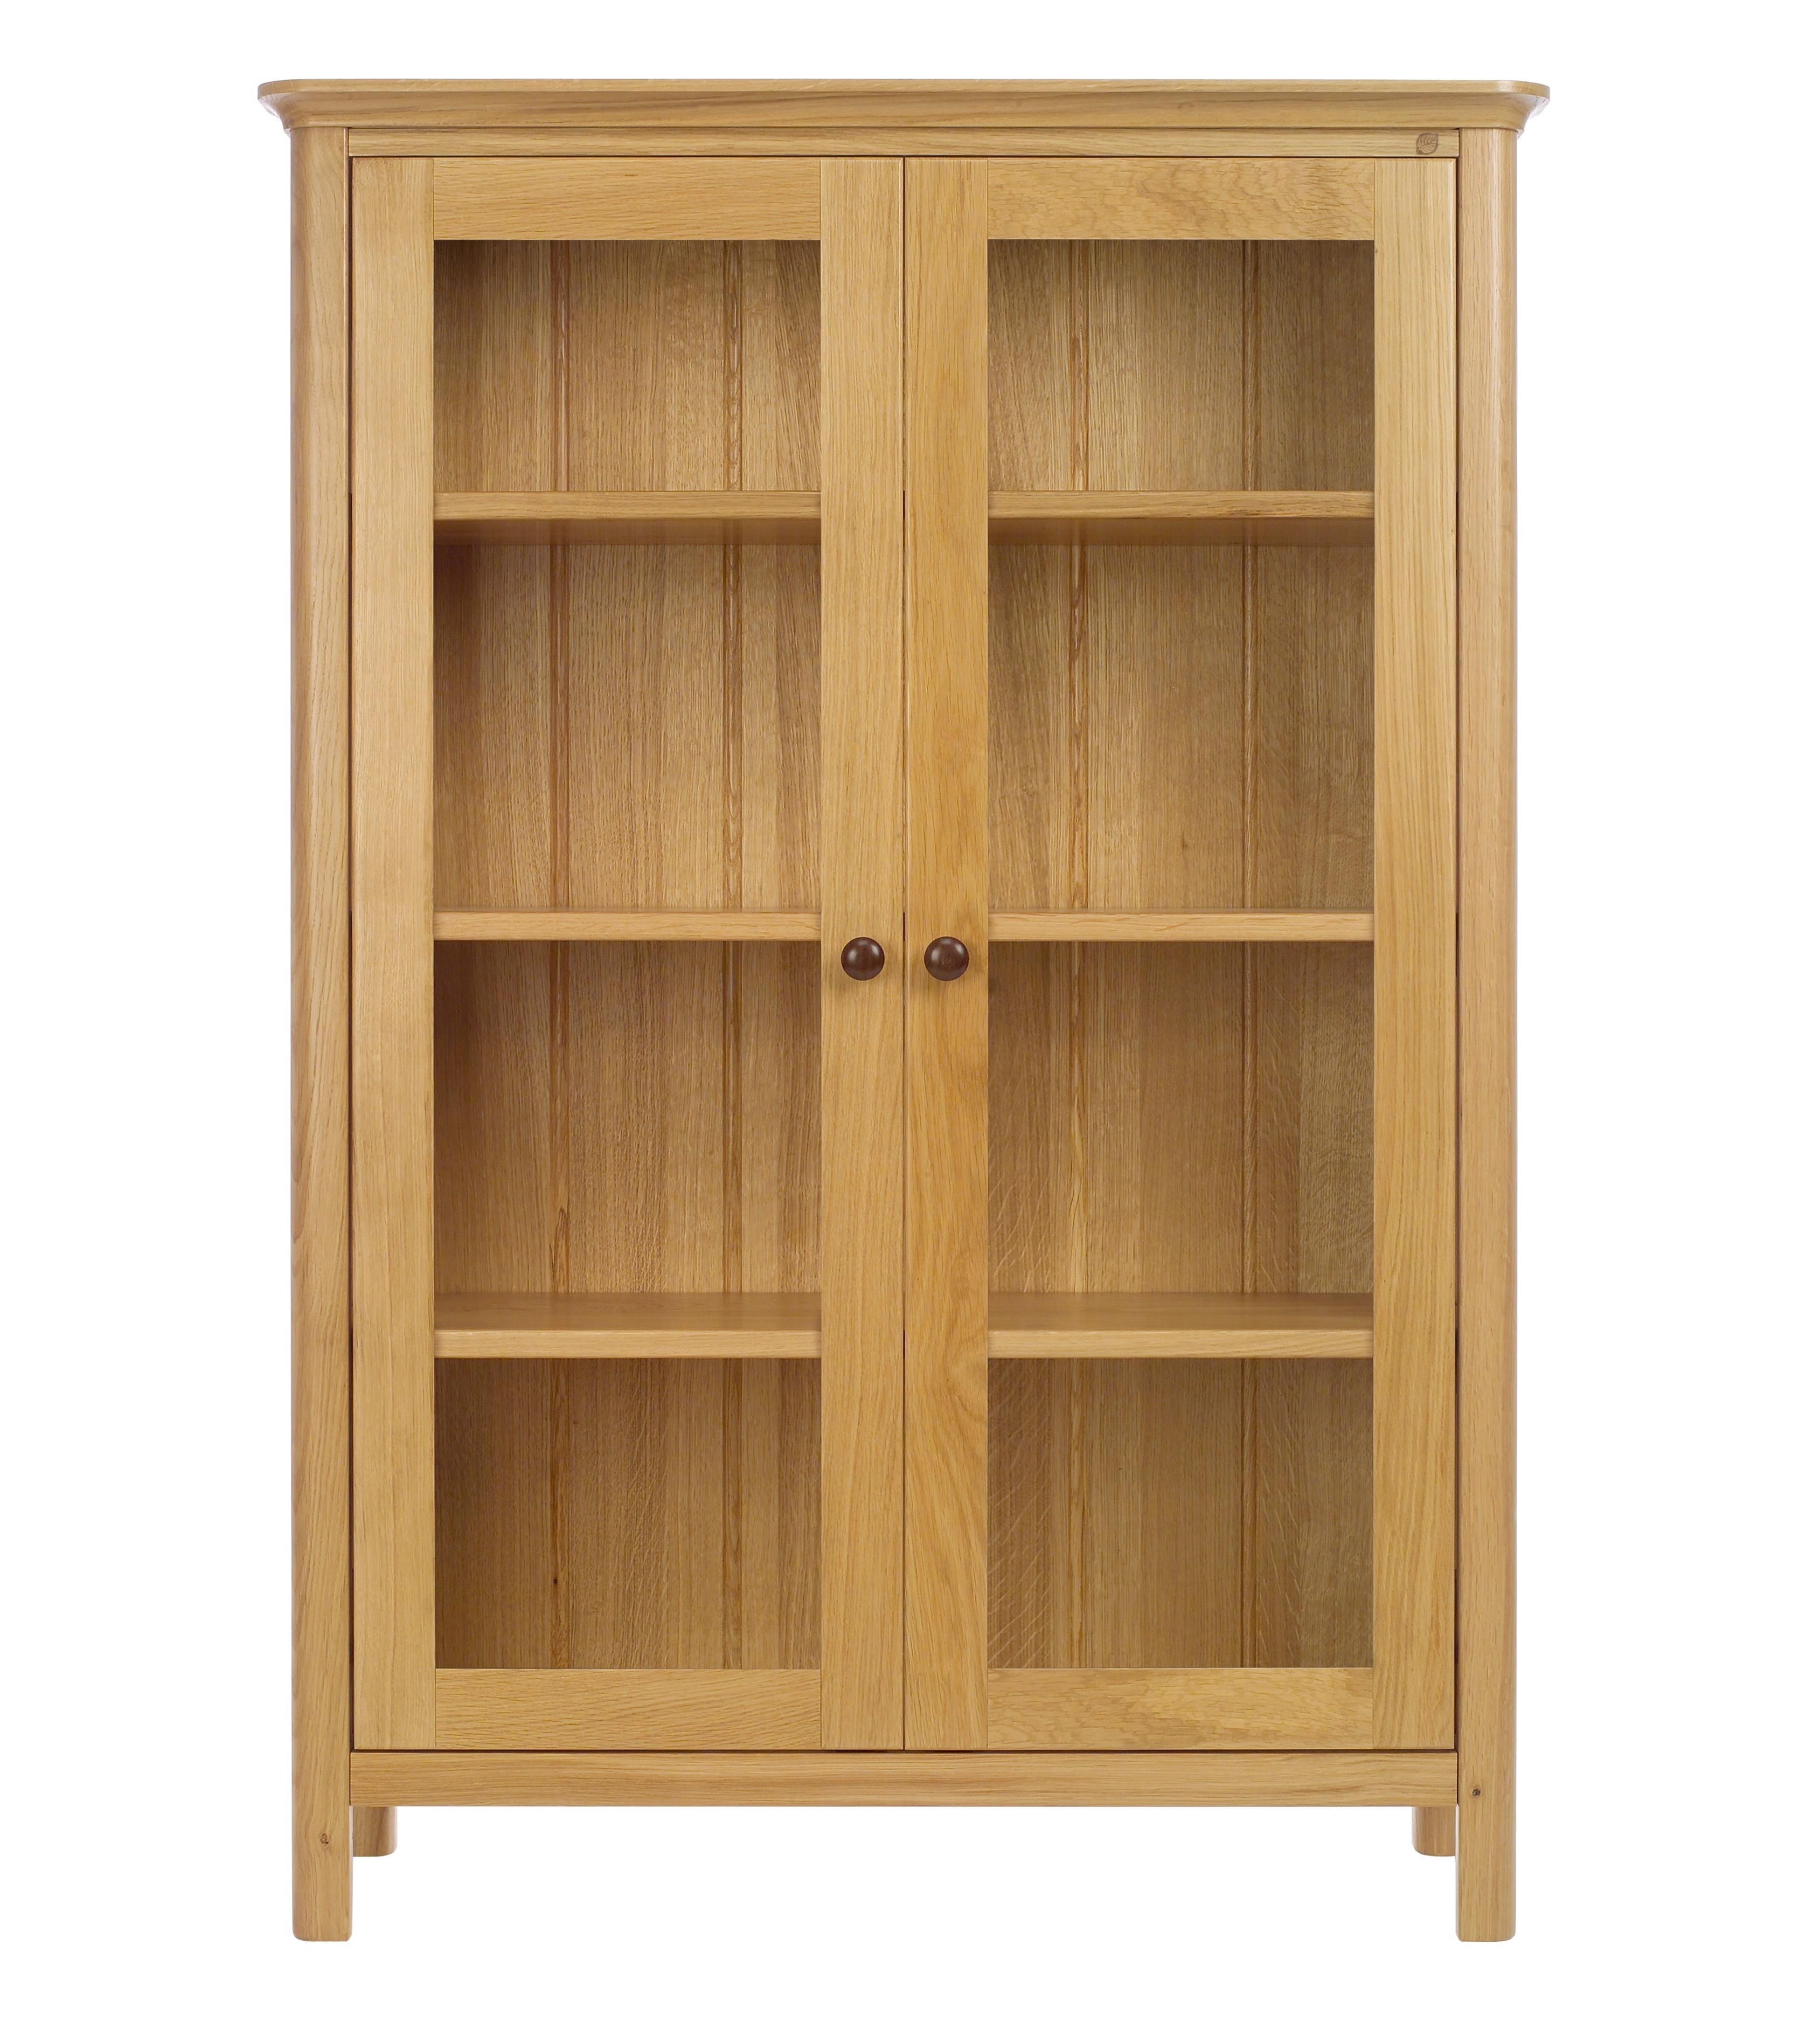 Oak Bookcases With Doors Bookshelves Glass Small Bookshelf ~ Idolza With Regard To Most Recent Book Cupboard Designs (View 5 of 15)